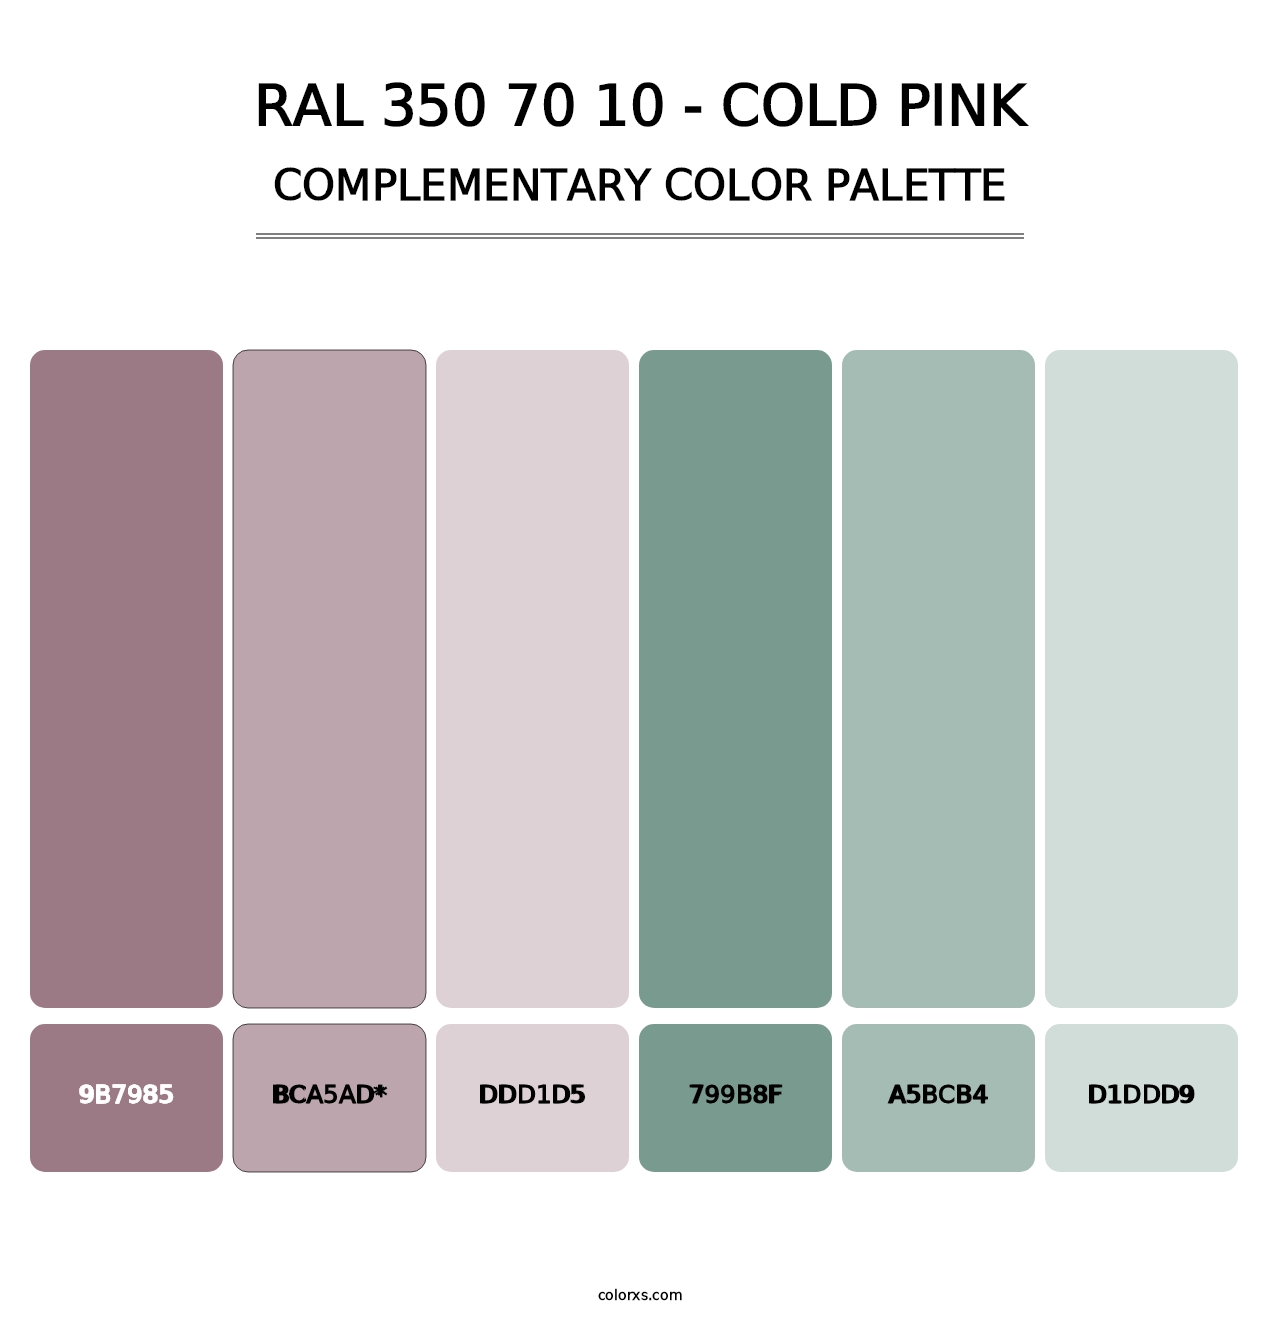 RAL 350 70 10 - Cold Pink - Complementary Color Palette